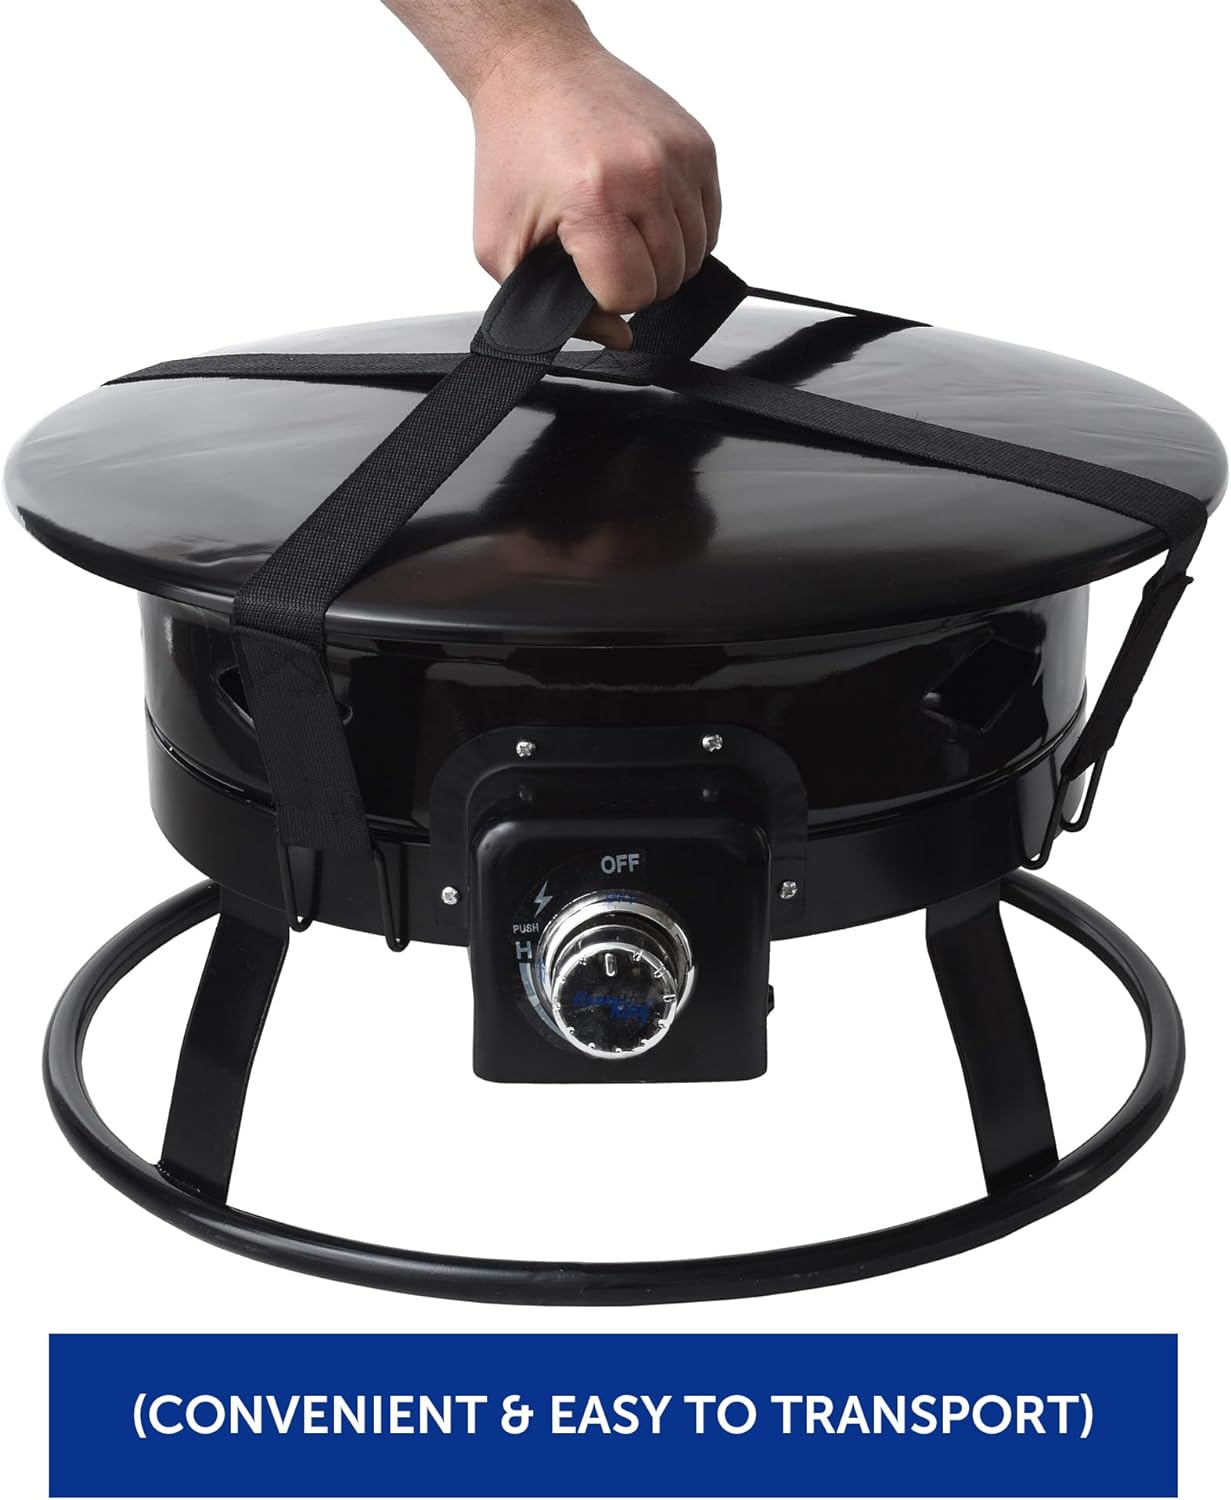 Flame King 19-inch Smokeless Propane Fire Pit with Self Igniter, Cover, & Carry Straps - Ideal for RV, Camping, & Outdoor Living